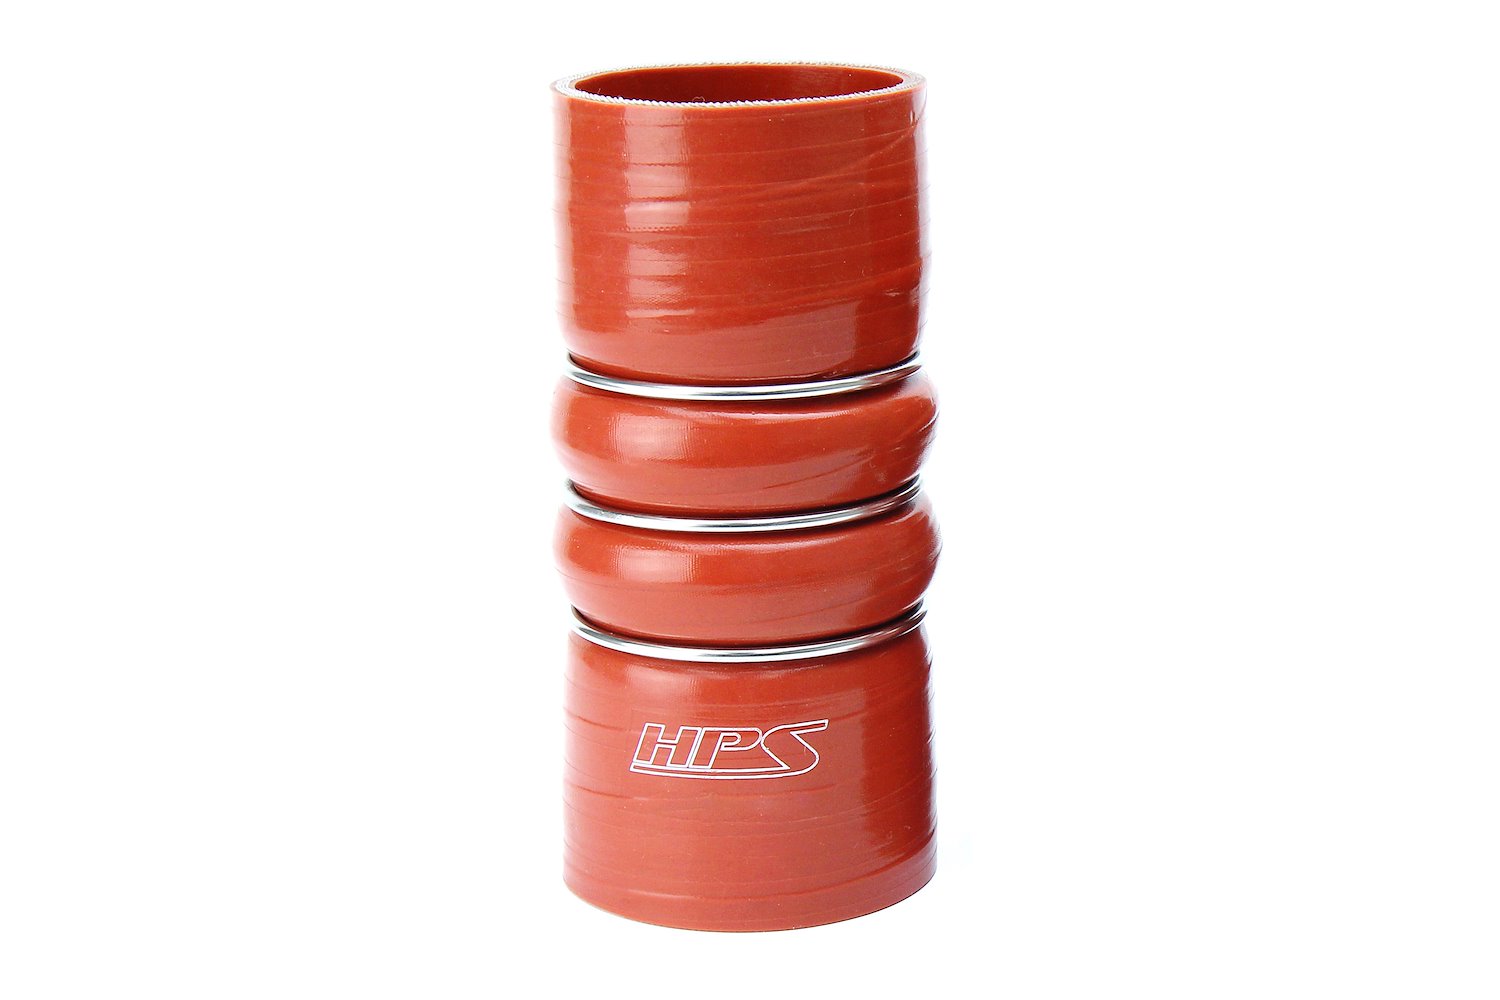 CAC-300-L8-HOT Silicone CAC Hose, Silicone CAC Hump Hose Hot, High-Temp 4-Ply Aramid Reinforced, 3 in. ID, 8 in. Long